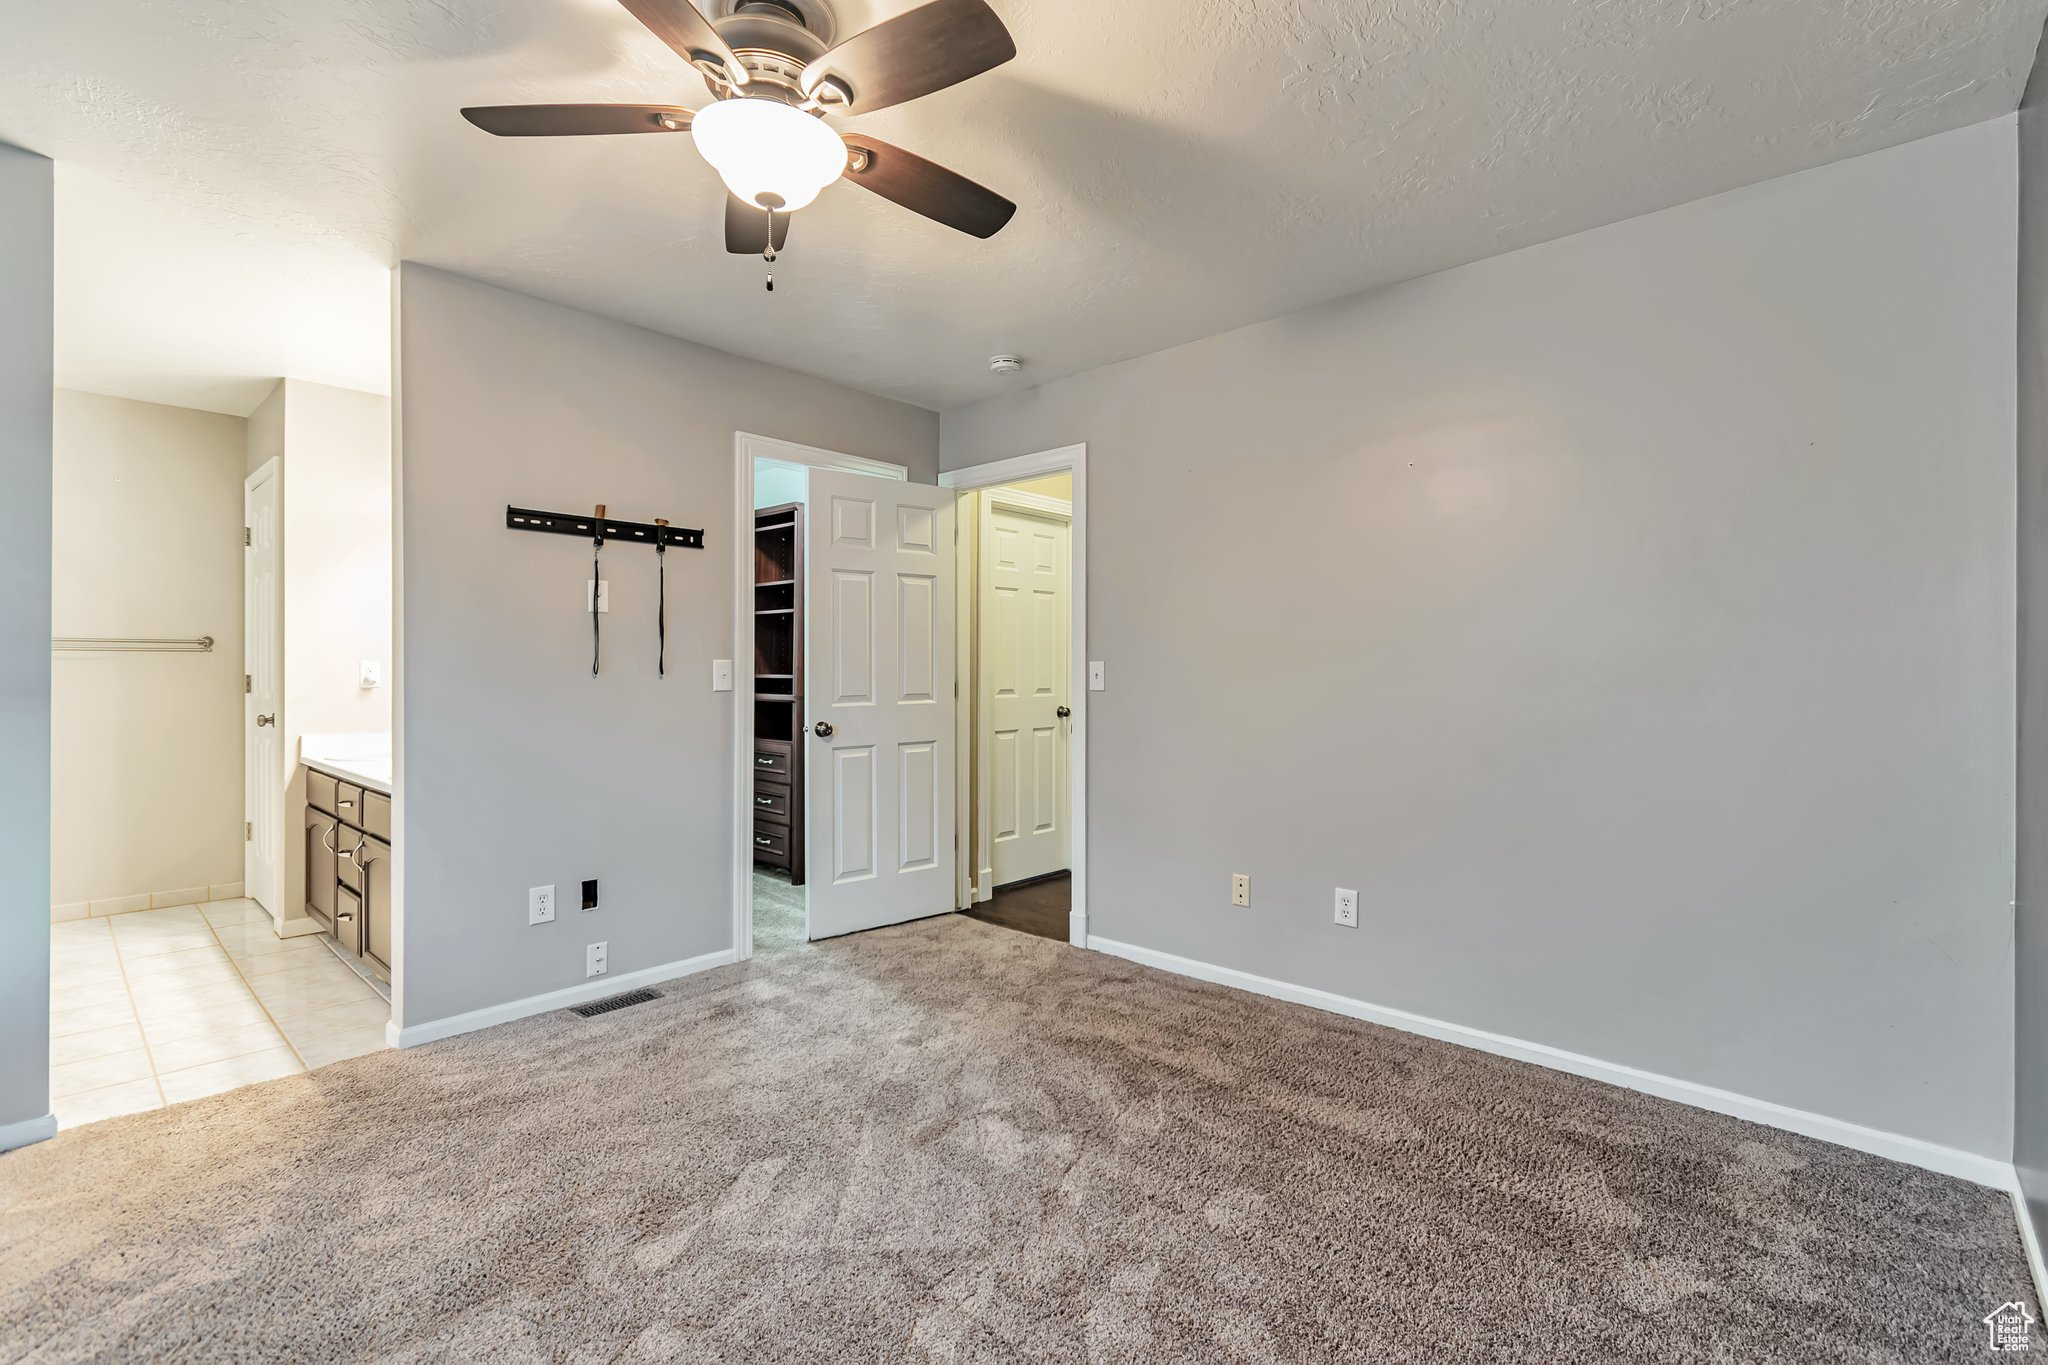 Master bedroom with a walk in closet with built in shelving, light carpet, ensuite bathroom, TV mount, and ceiling fan